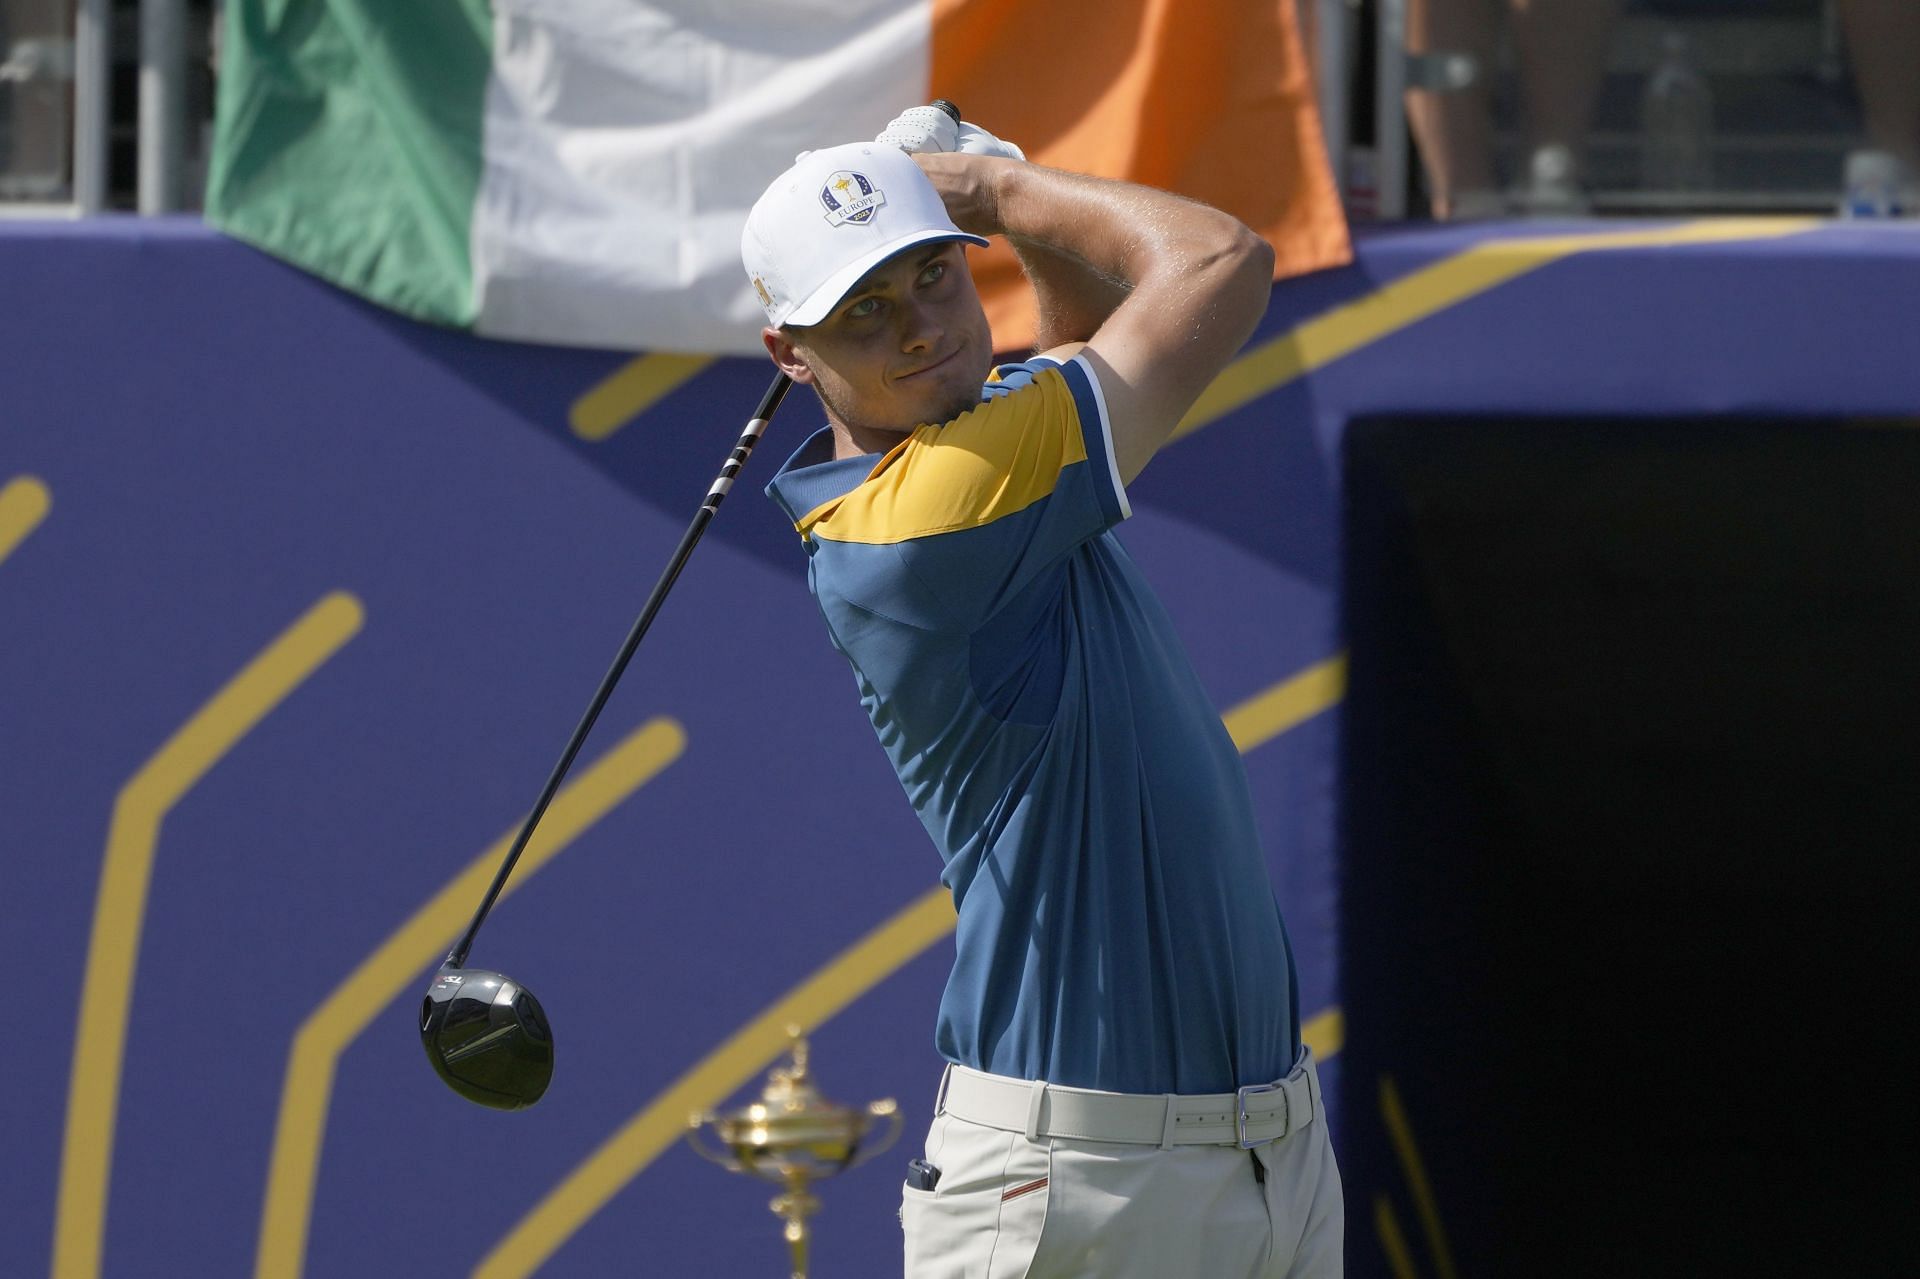 Italy Ryder Cup Golf (Image via Getty)